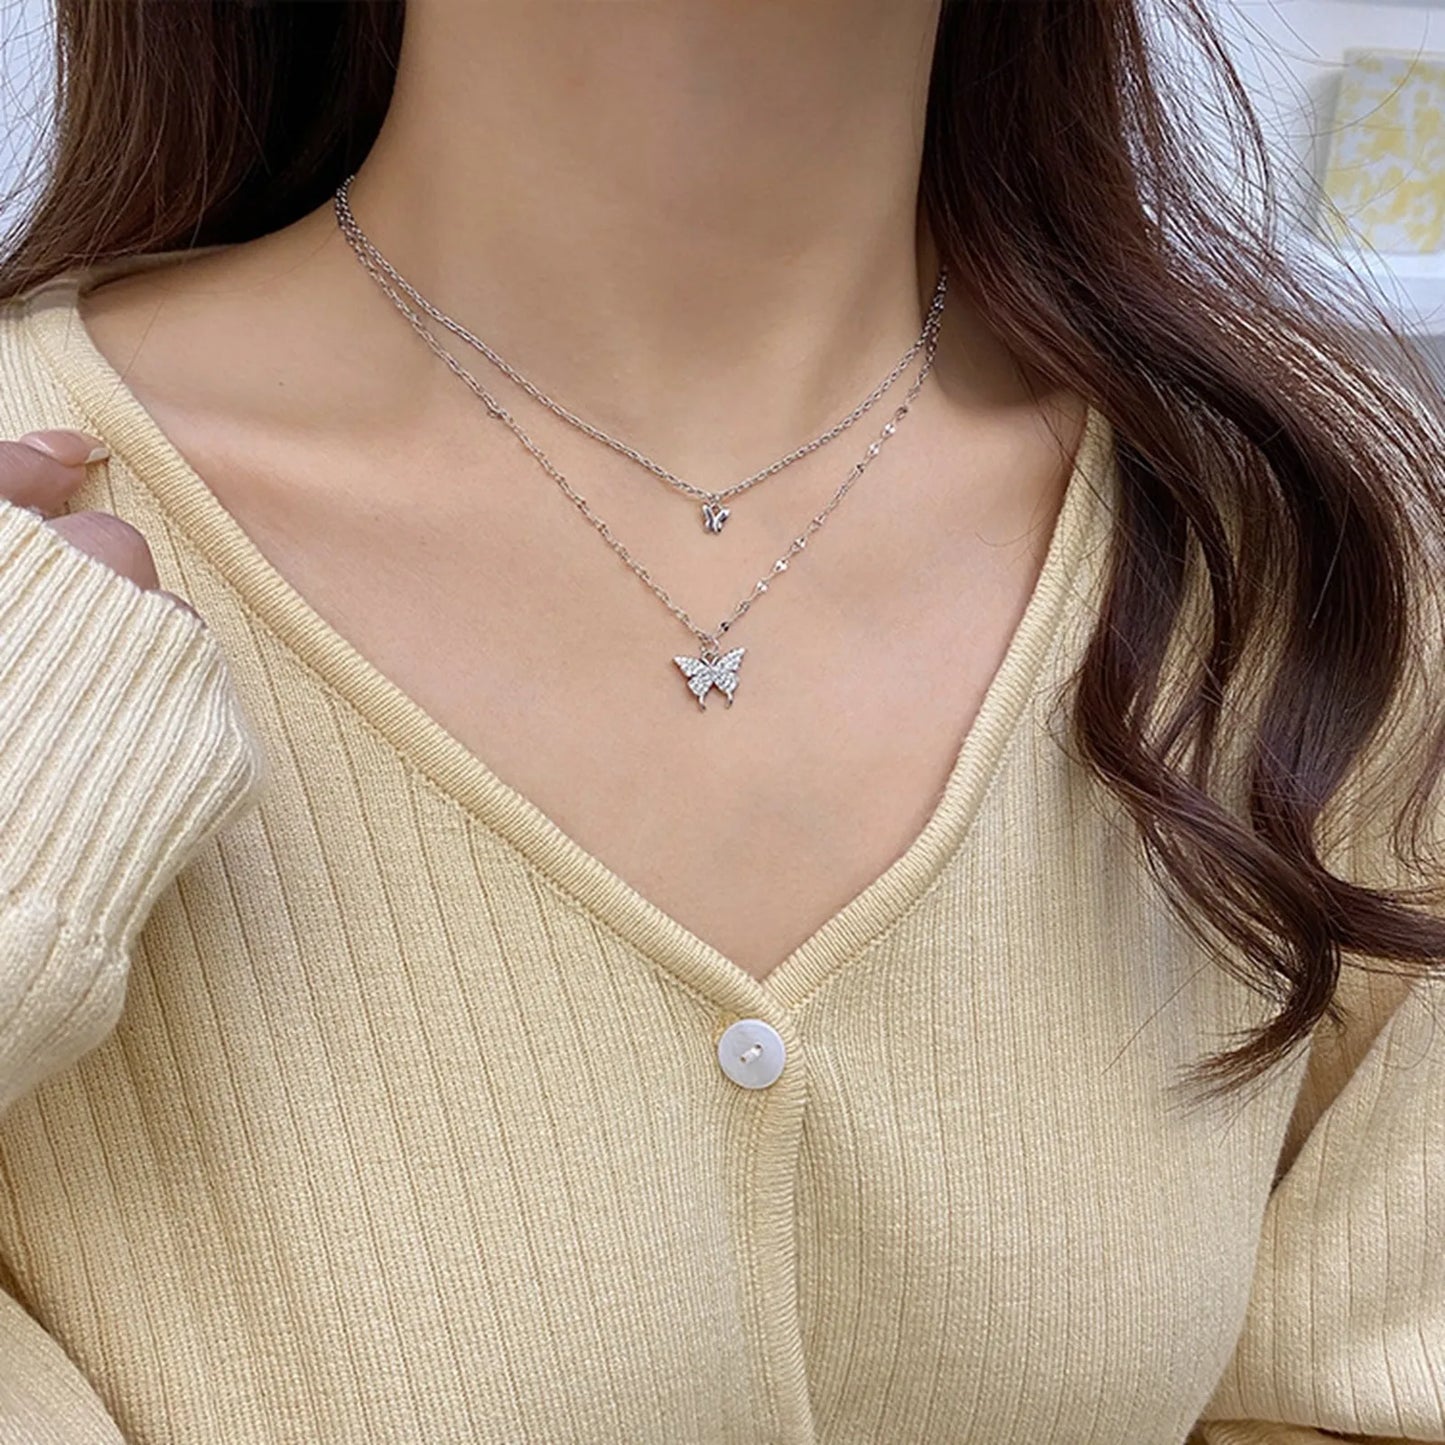 Elegant Necklace For Women Butterfly Necklace Shiny Double Clavicle Chain Pendant Anniversary Gift Jewelry Collares Para Mujer